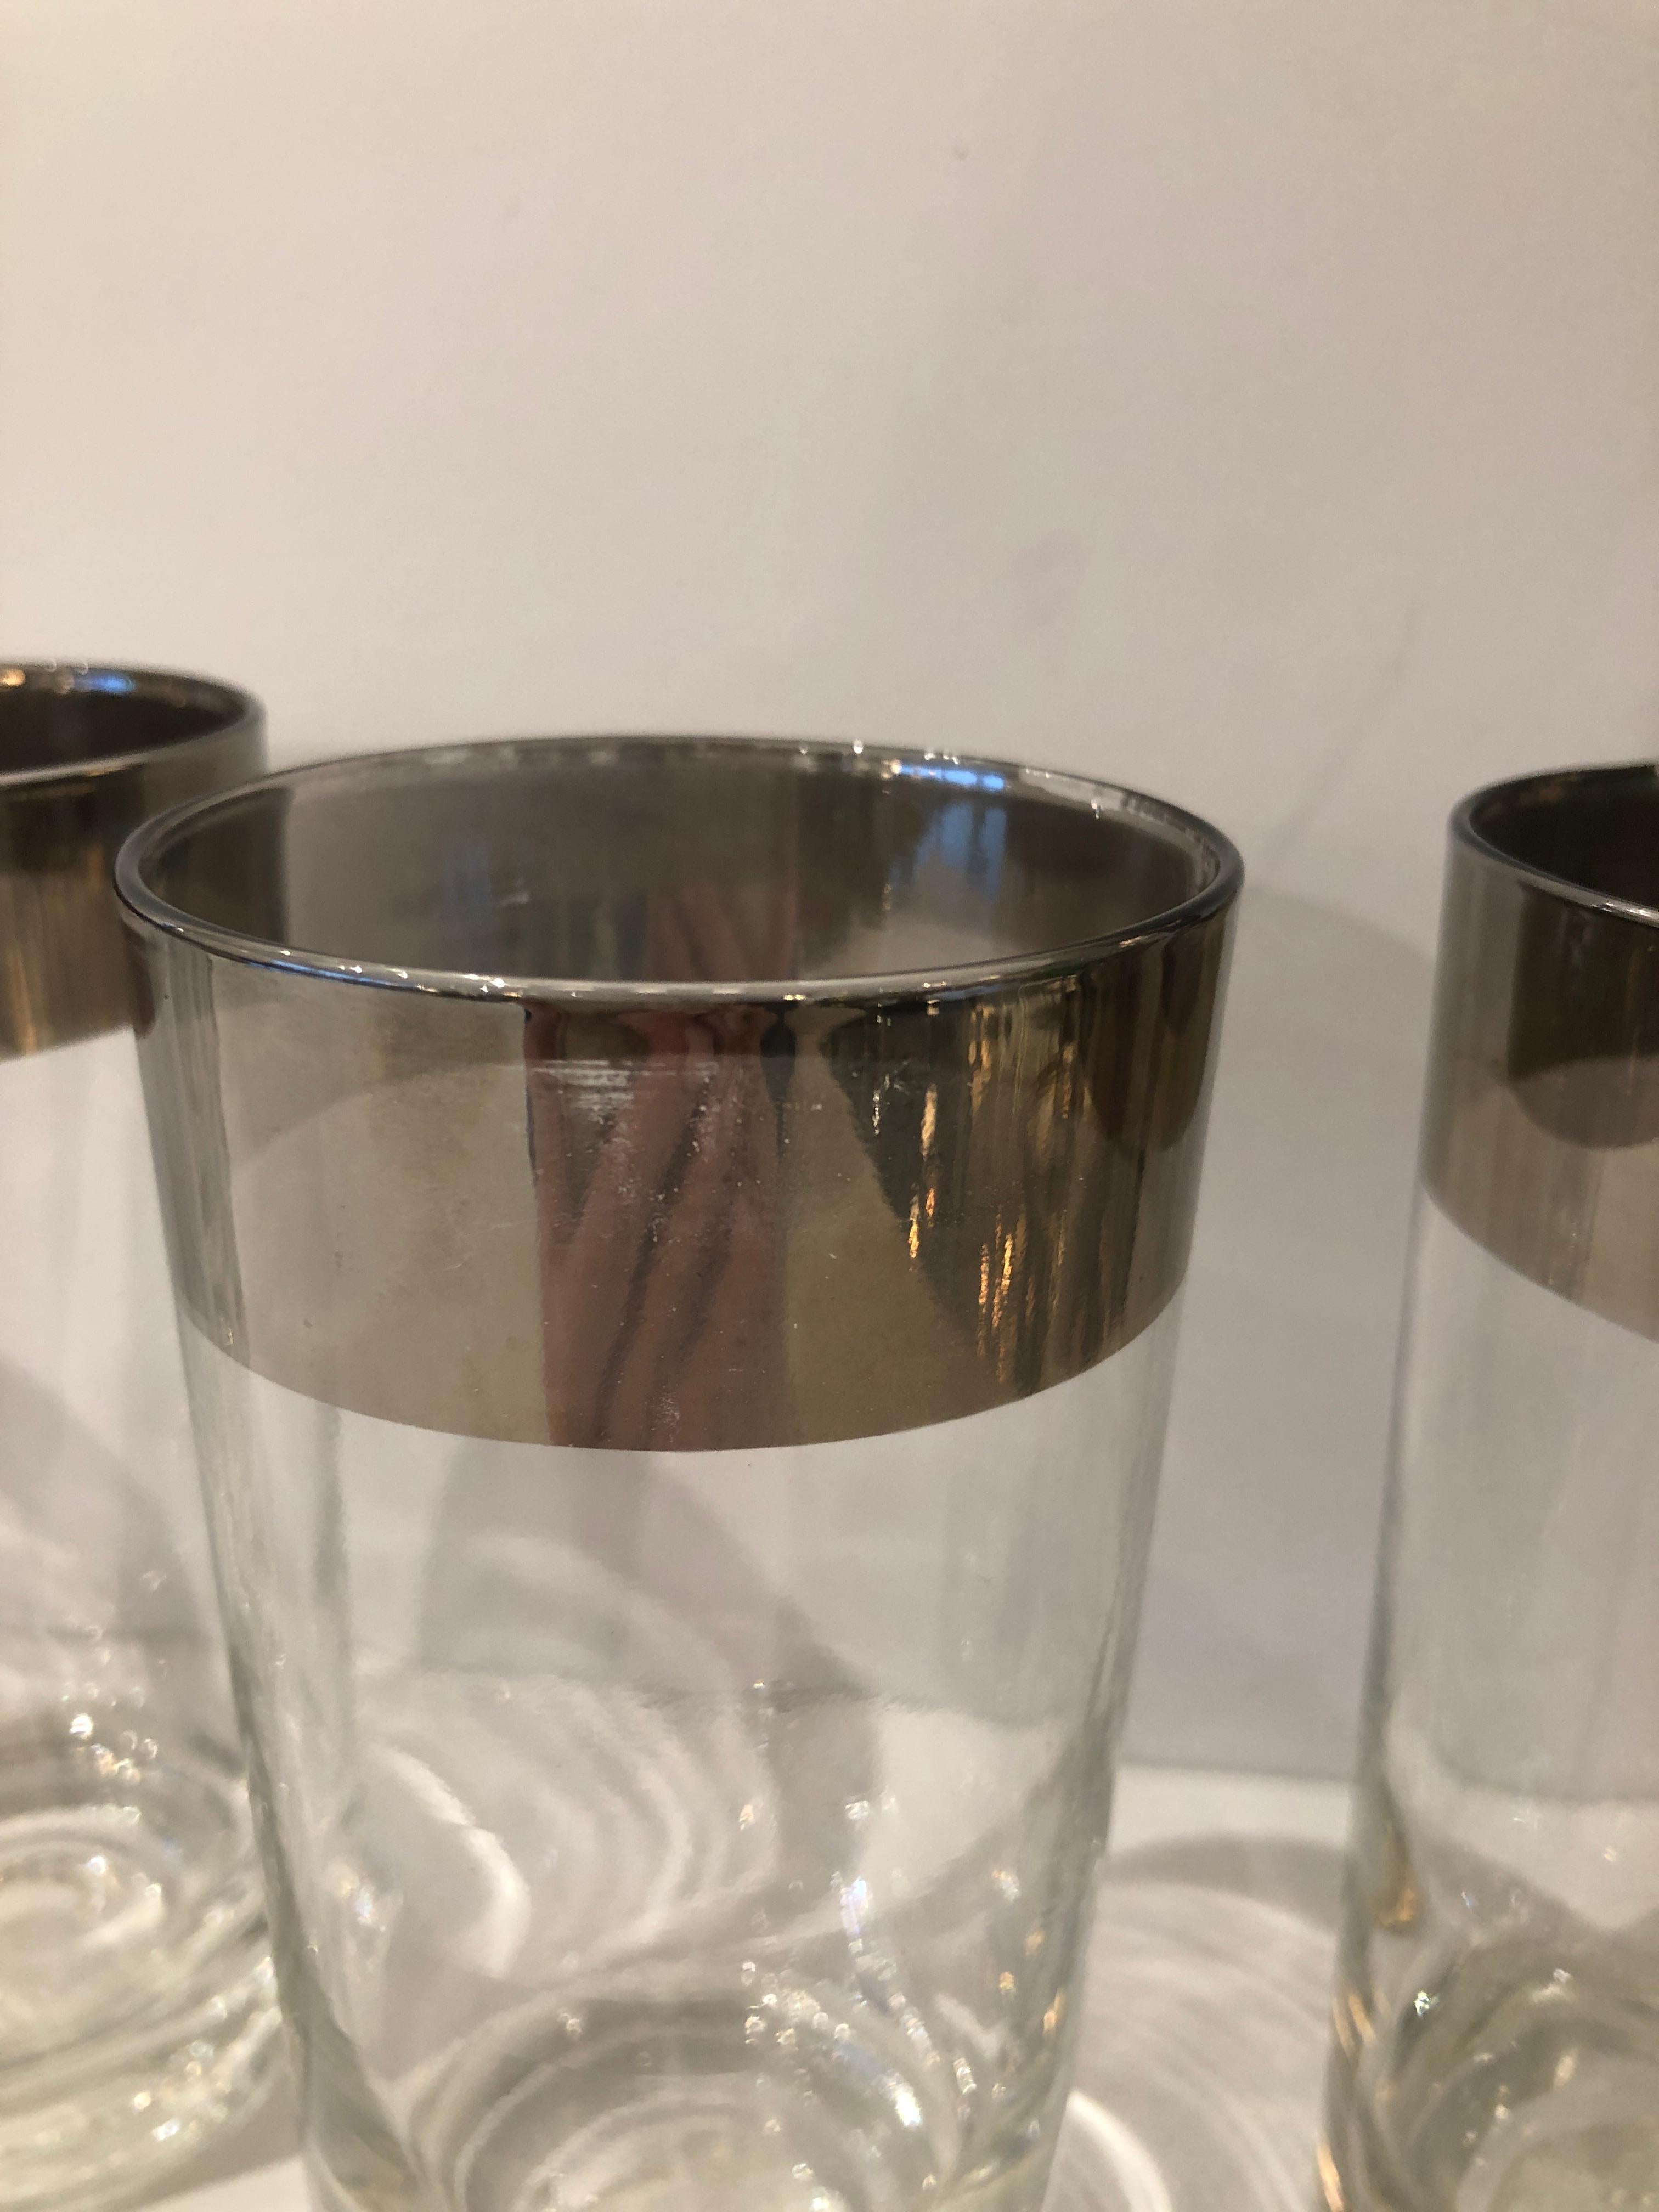 Offered are a set of 8 Mid-Century Modern Dorothy Thorpe silver overlay 